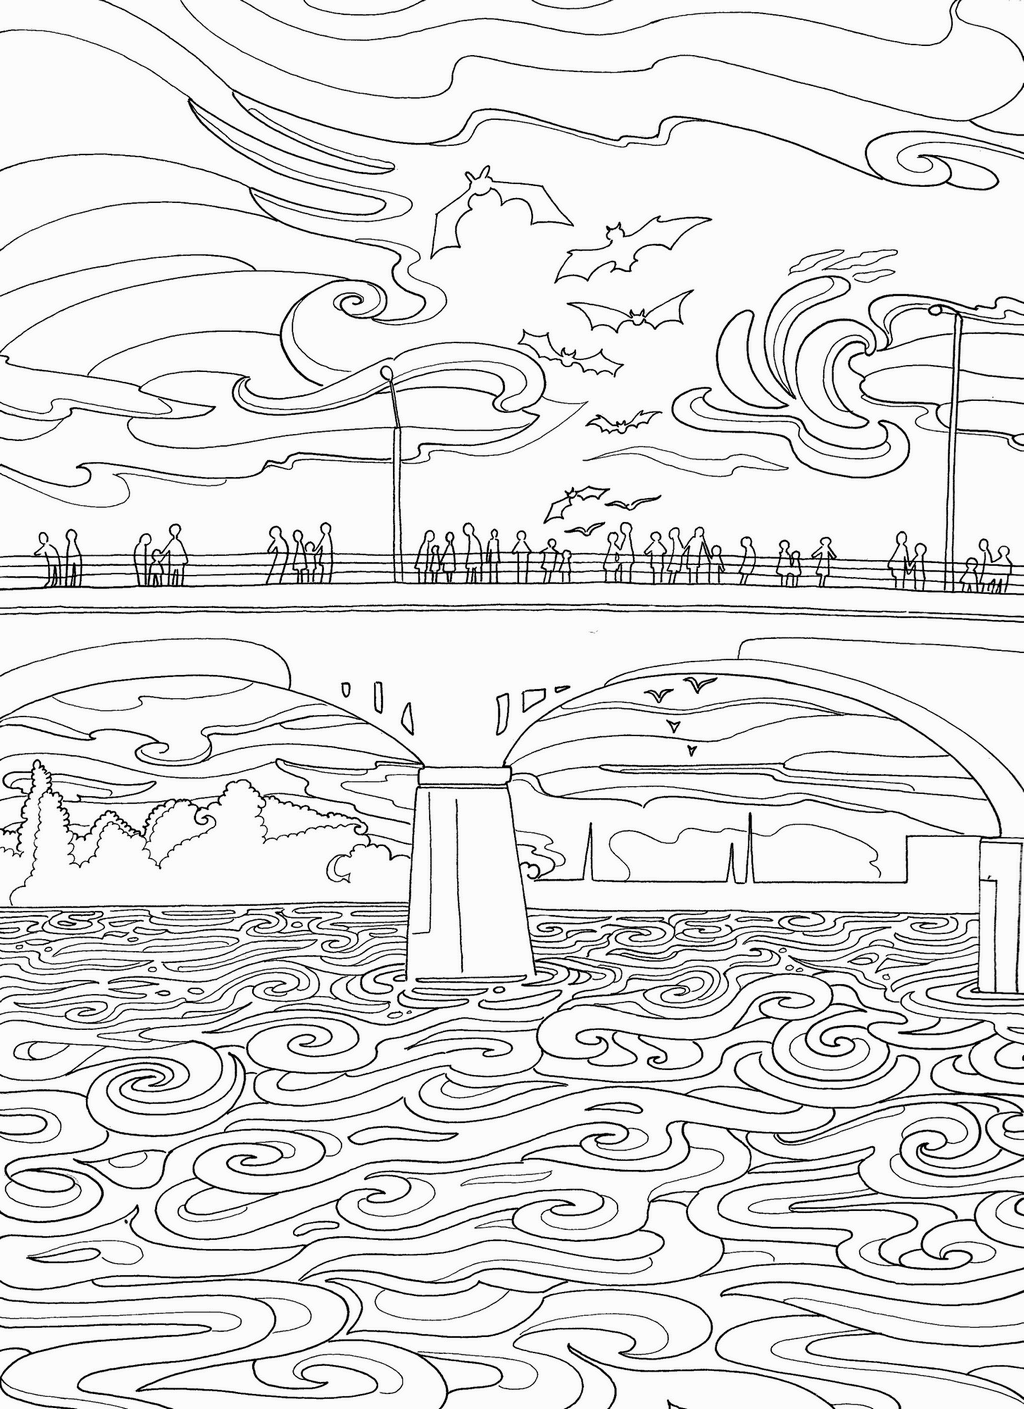 complex bridge coloring page for adults